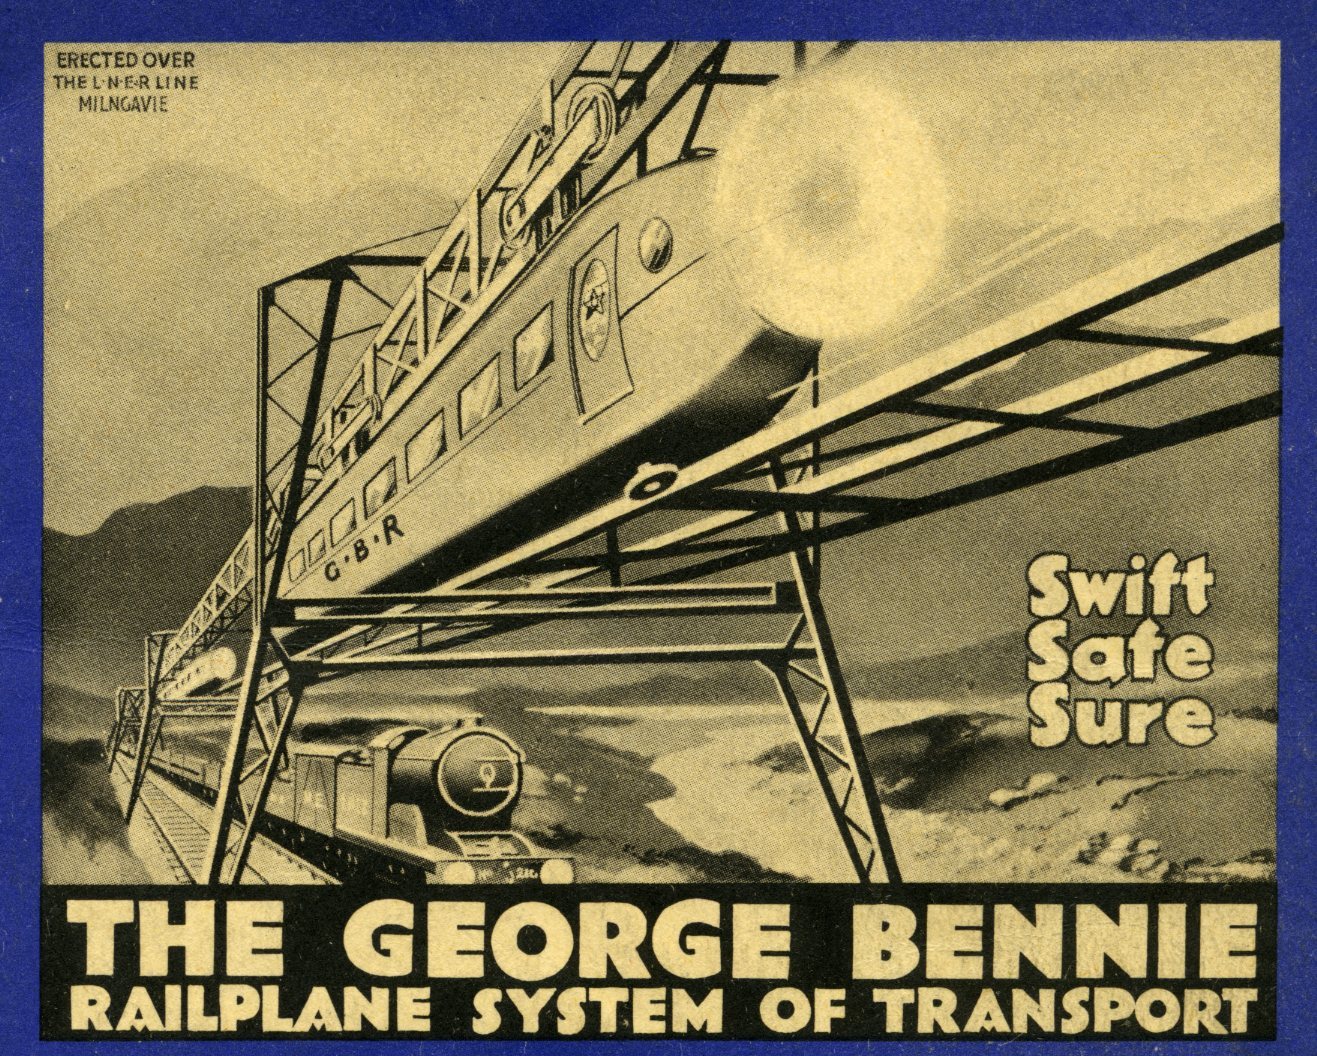 Poster showing the Benie railplane as swift, safe and sure, riding above a freight train.